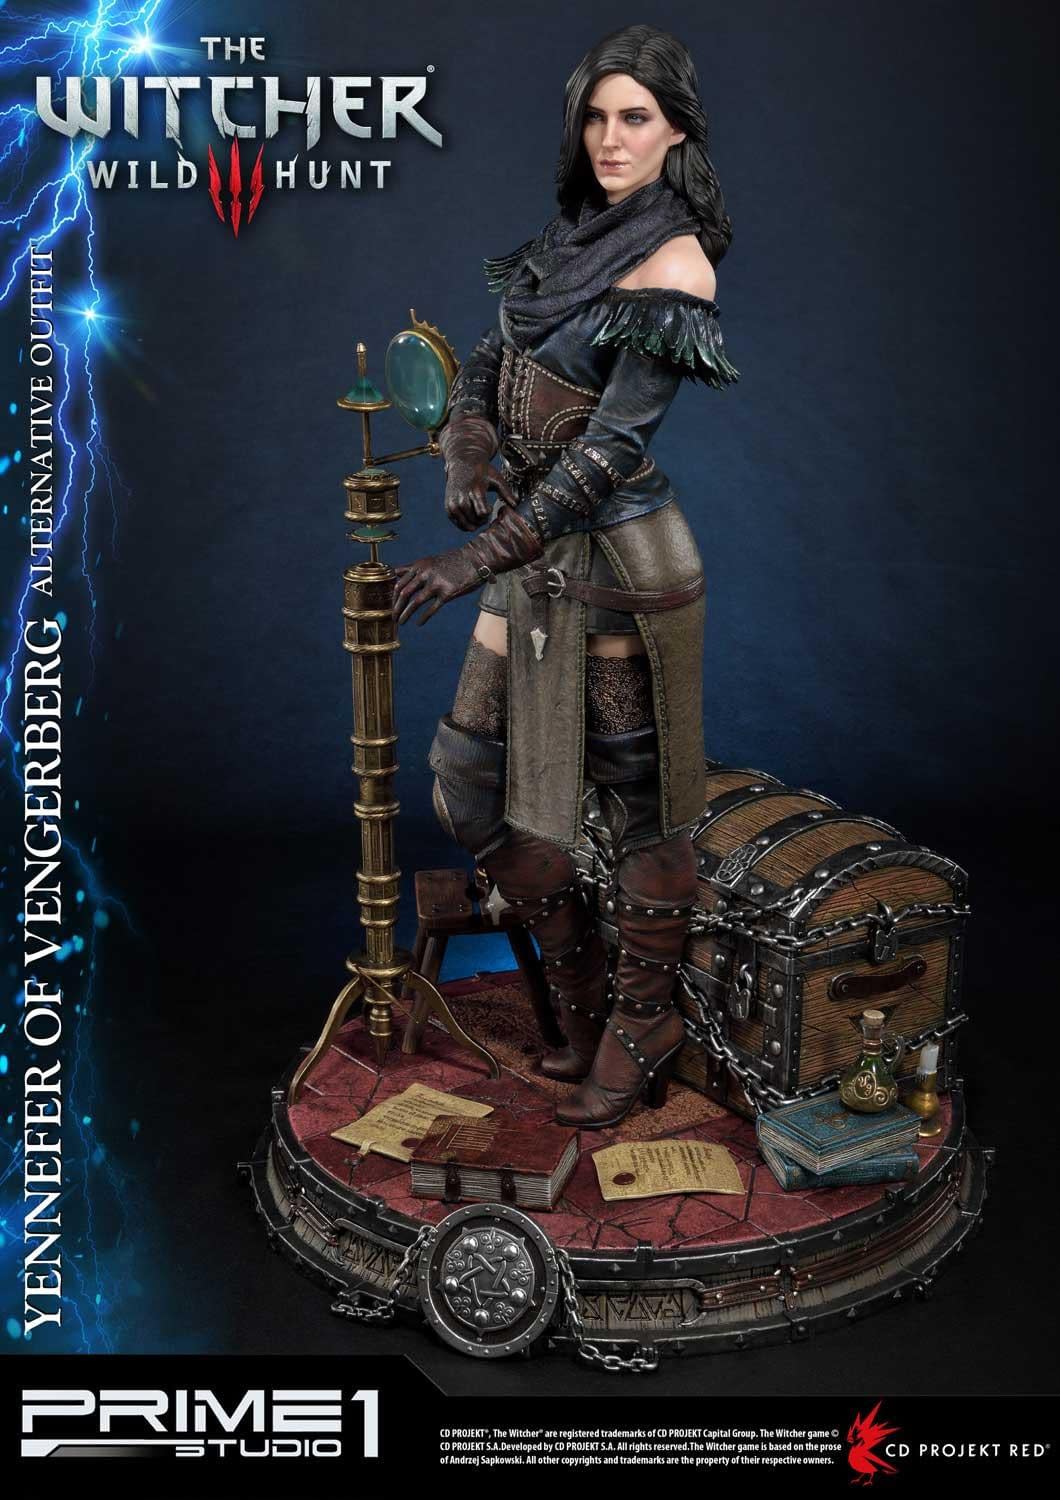 The Witcher 3 Yennifer Gets a Prime 1 Studio Statue